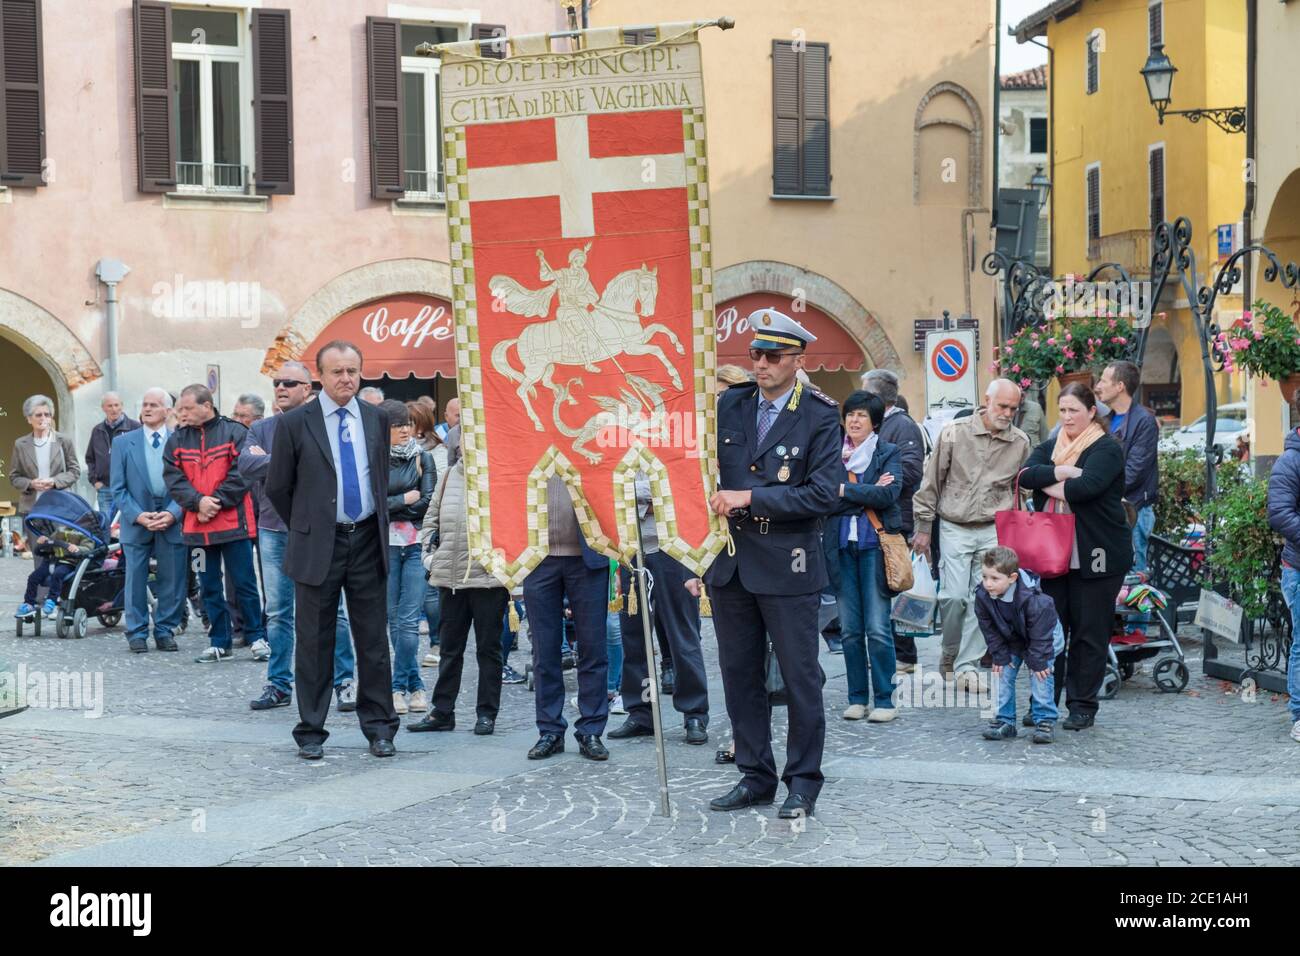 Community procession with dignitaries in the small town of Bene Vagienna, Cuneo, Italy Stock Photo